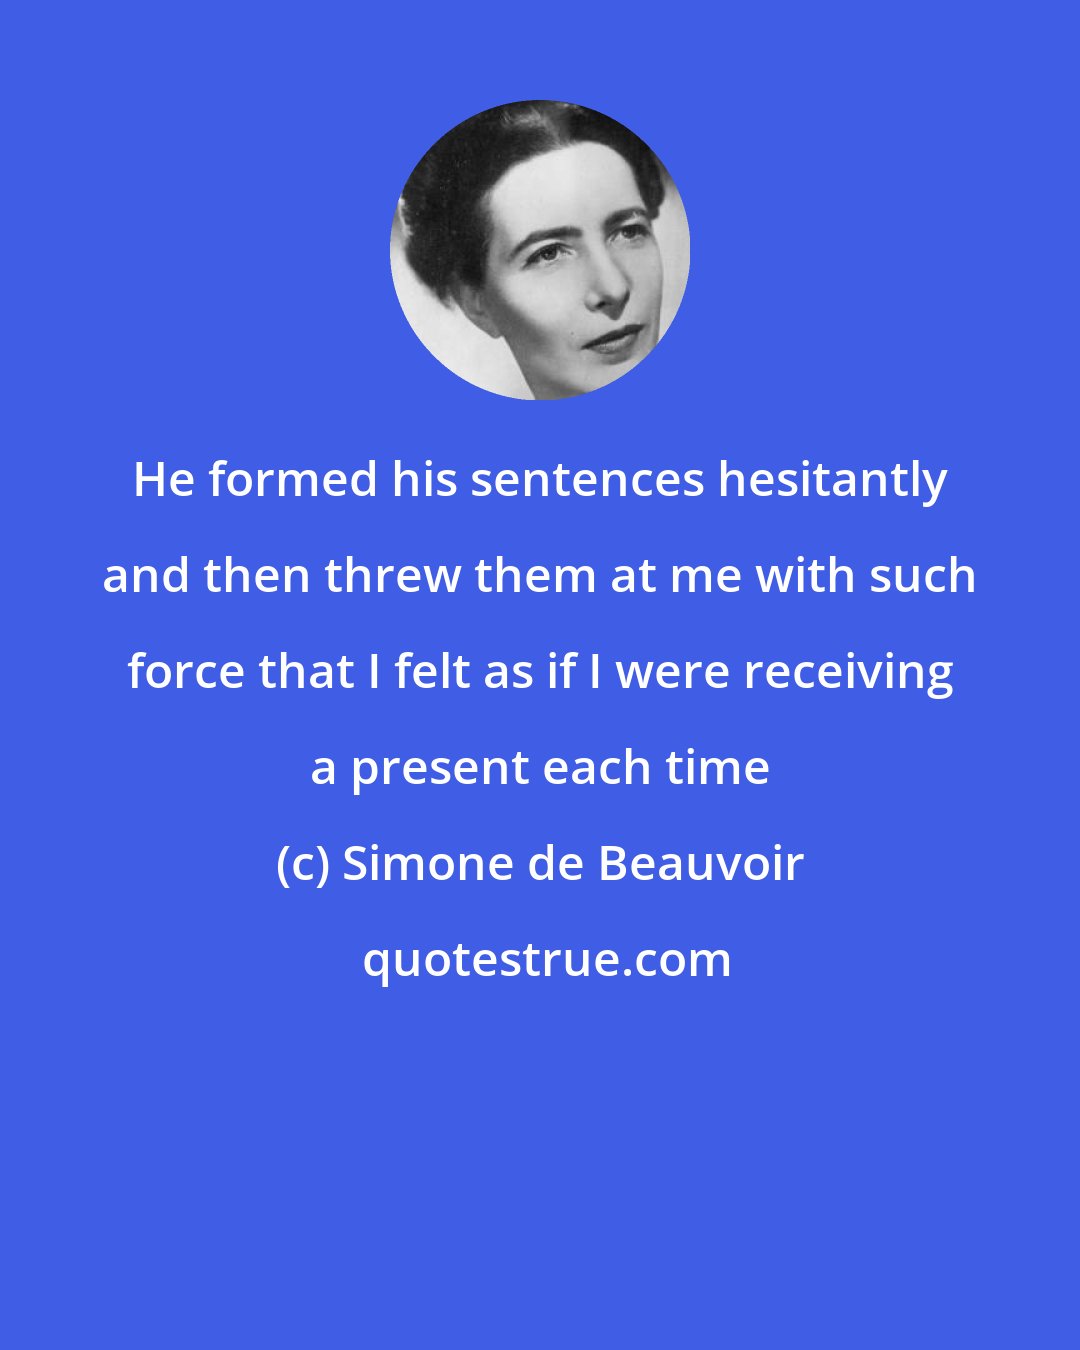 Simone de Beauvoir: He formed his sentences hesitantly and then threw them at me with such force that I felt as if I were receiving a present each time